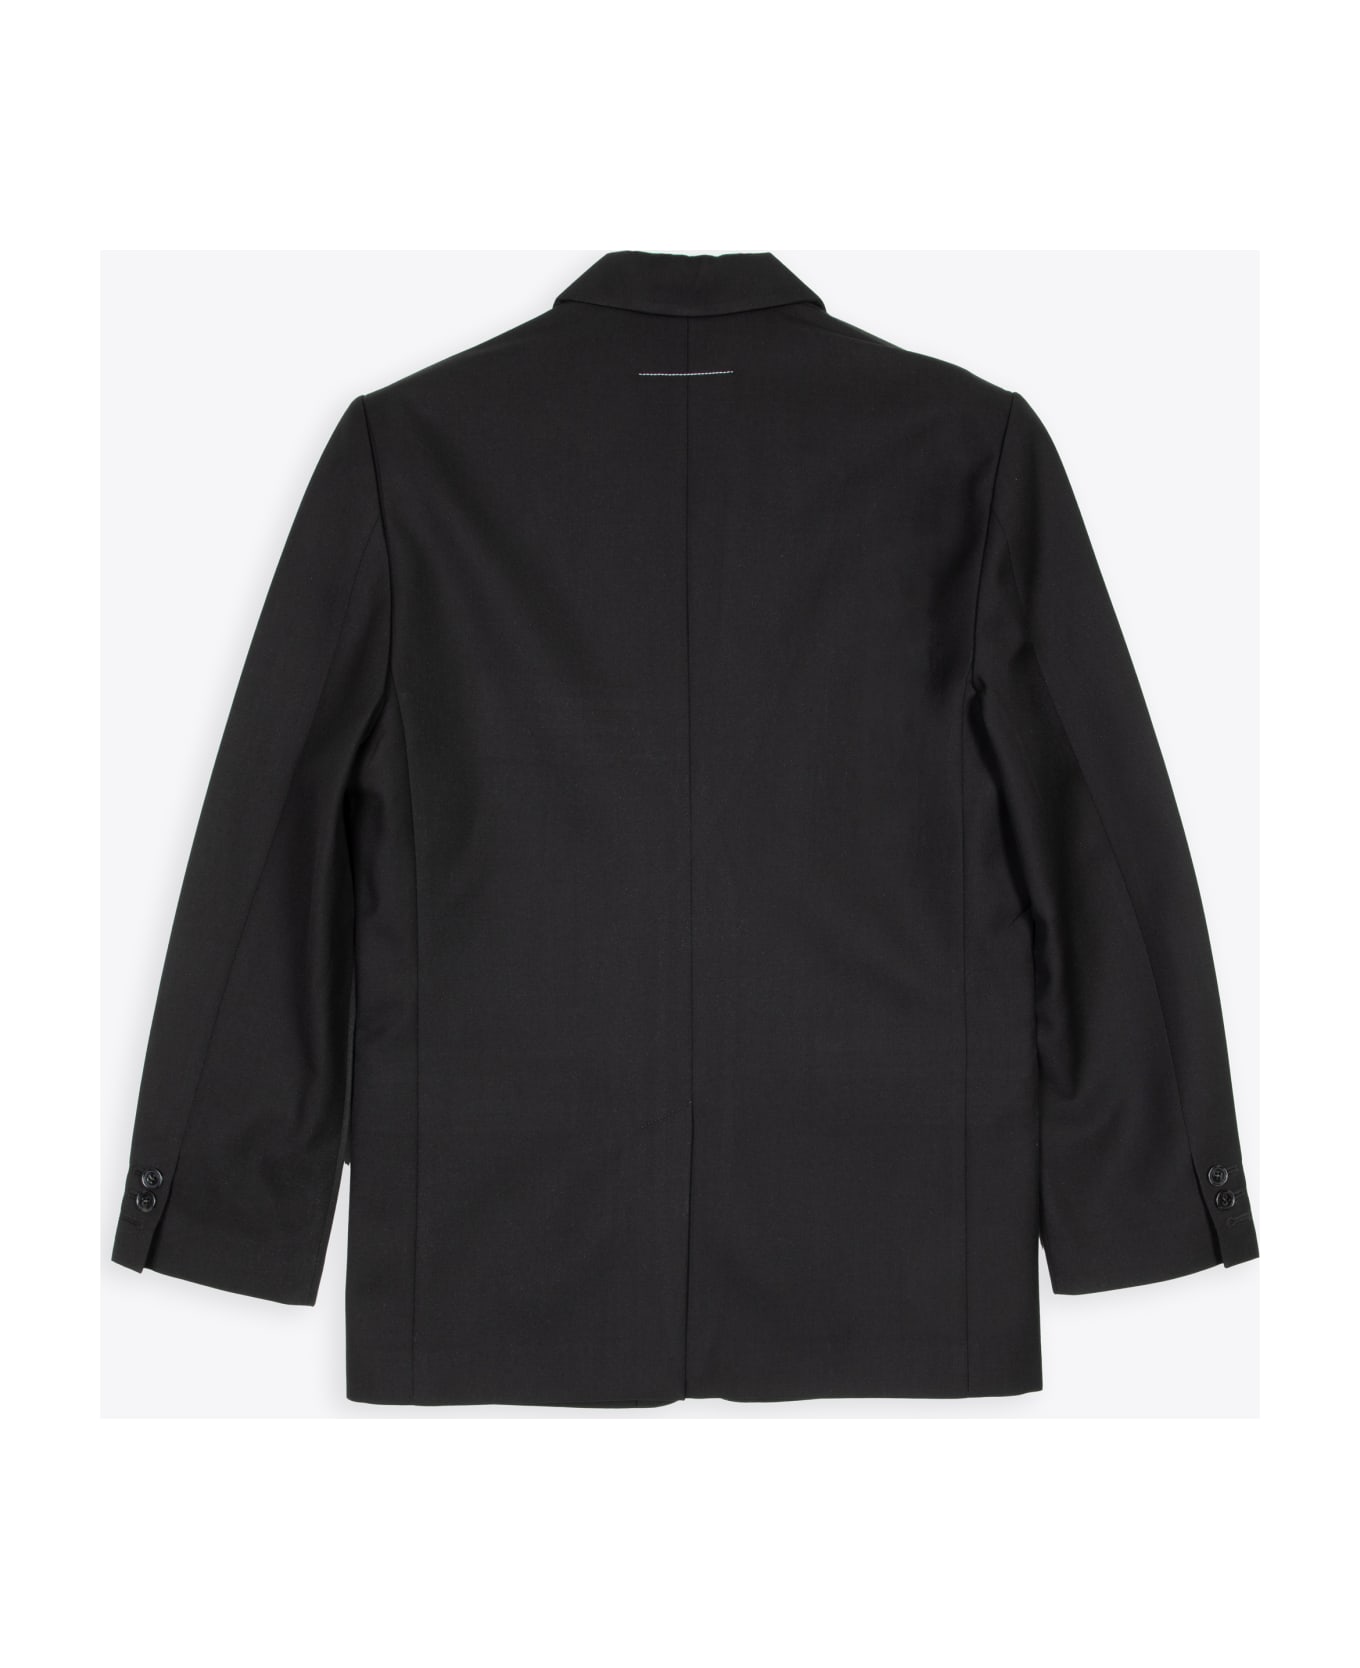 MM6 Maison Margiela Giacca Black Wool Tailored Blazer With Waxed Front - Nero ジャケット